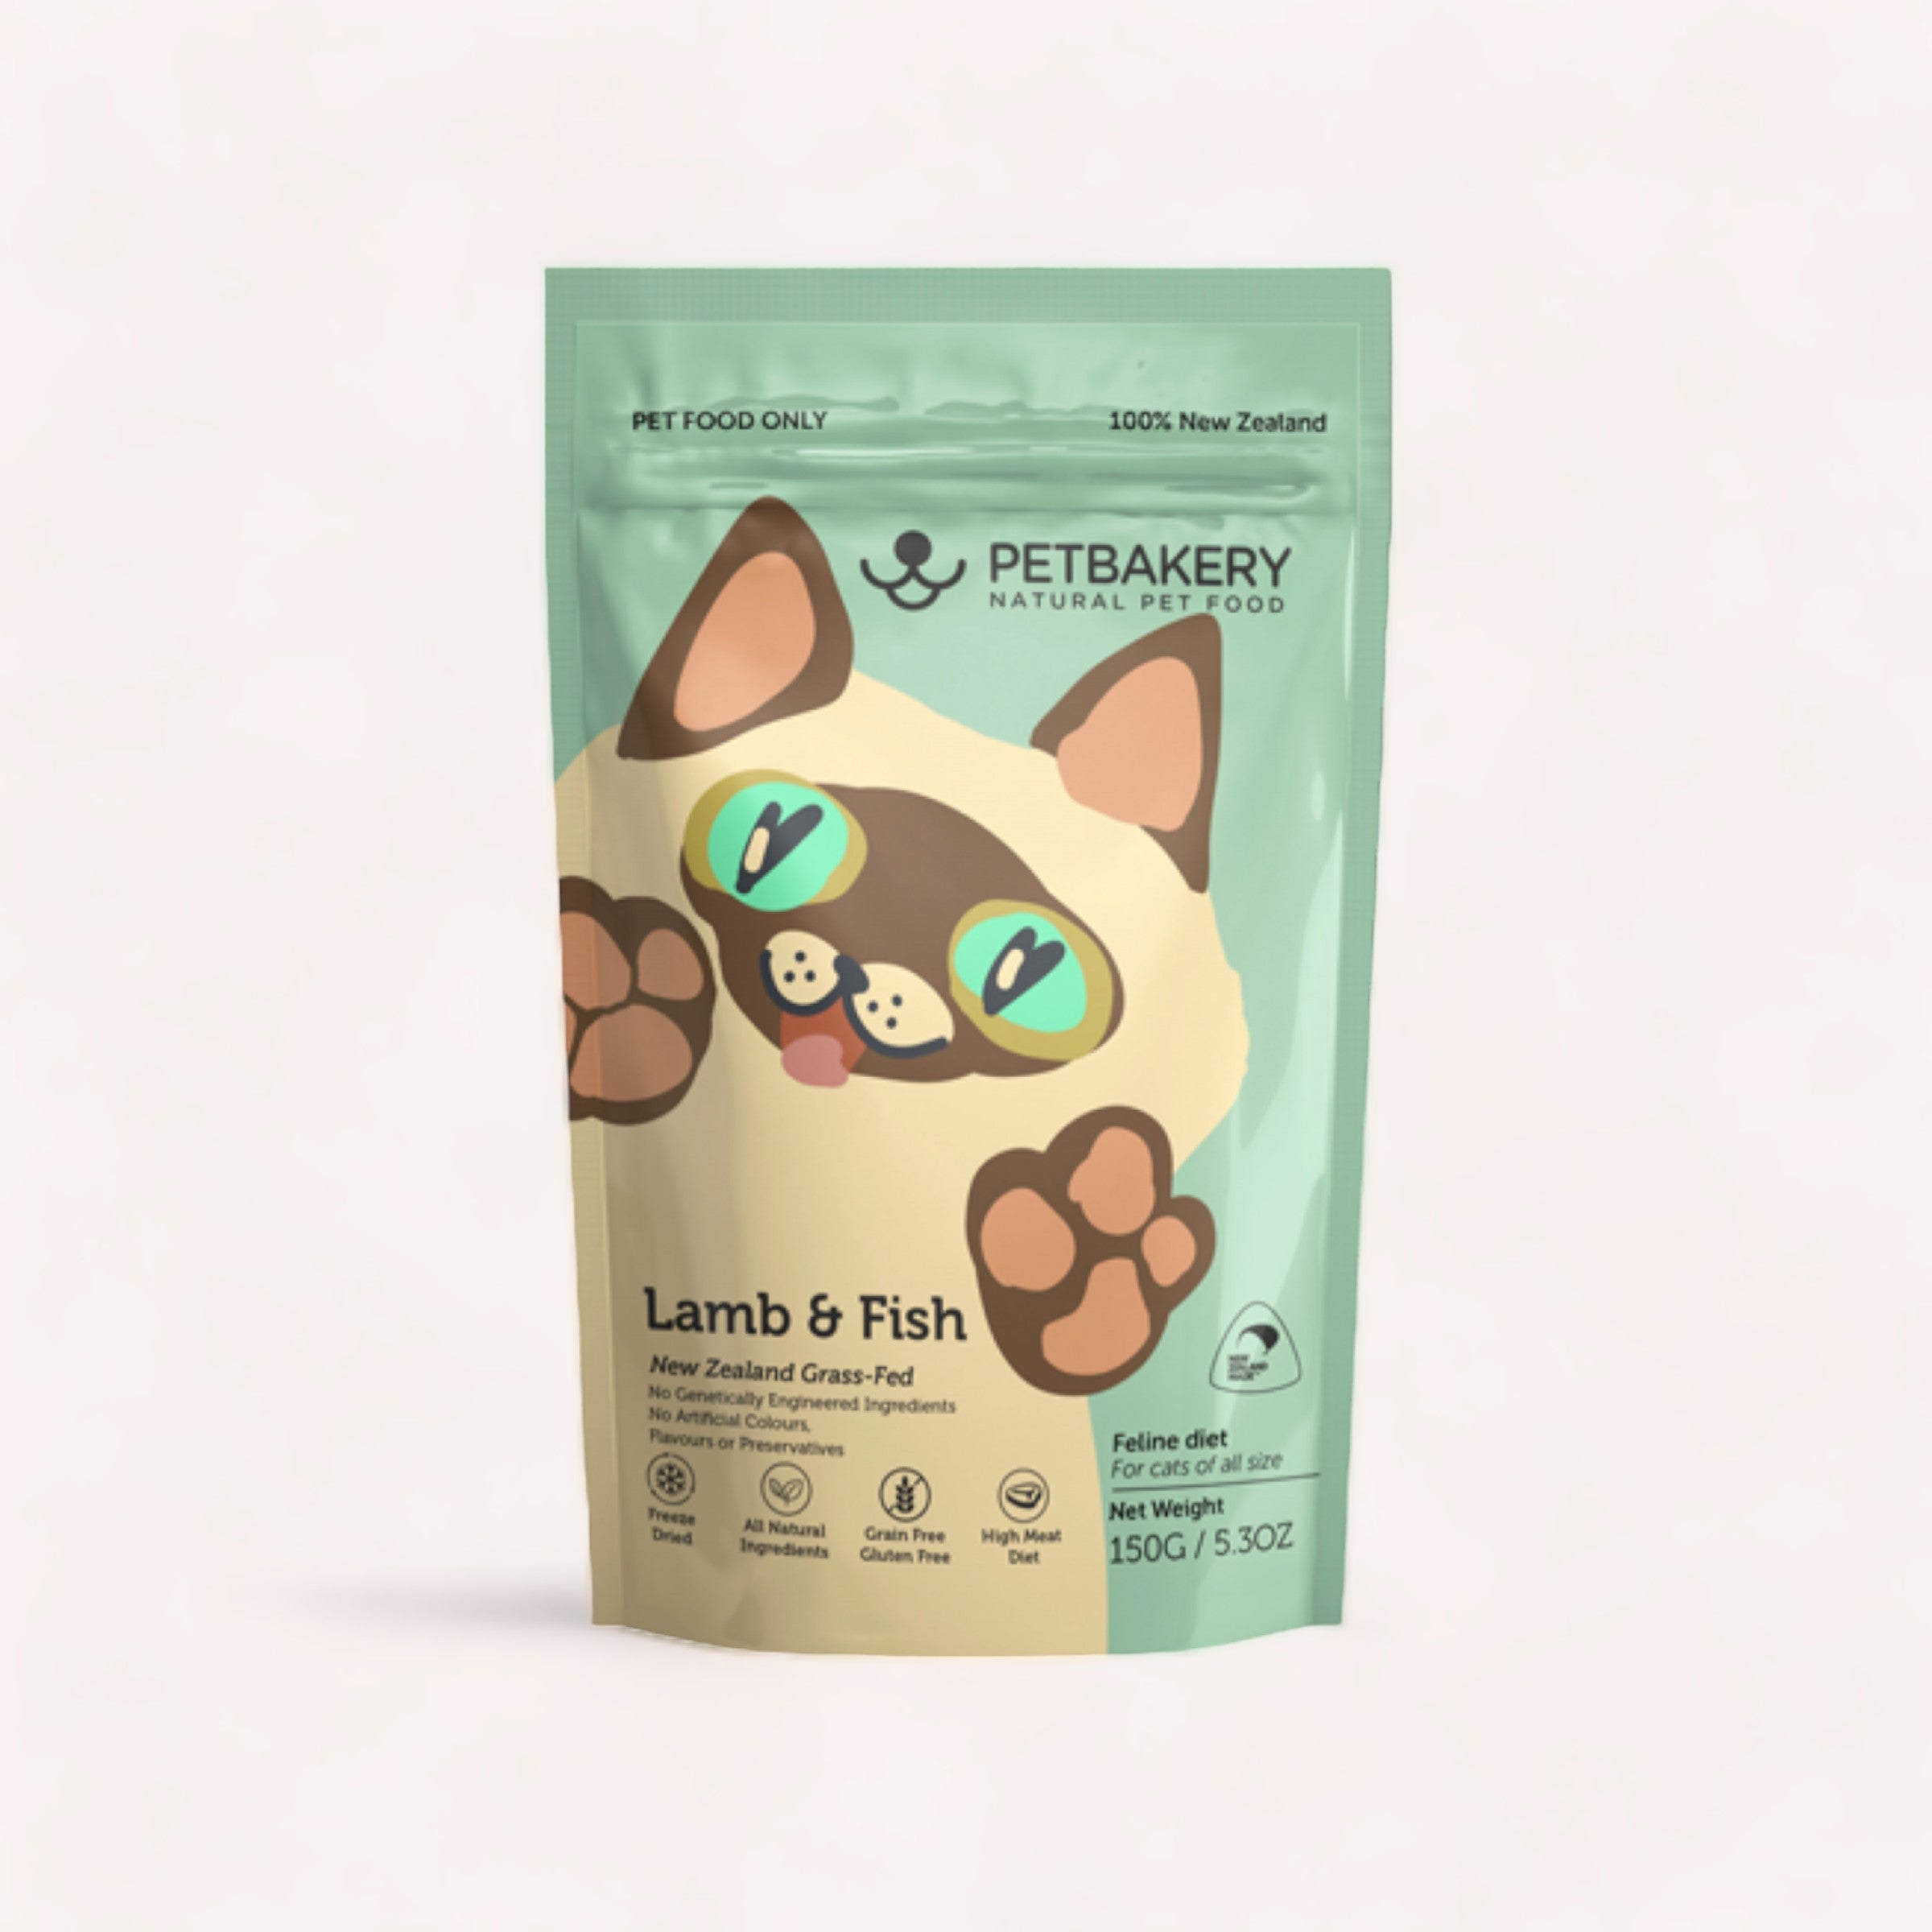 A package of Petbakery Lamb & Fish Treats with a cute cartoon cat face and paw prints, marketed as grain-free, high in Omega 3 and for feline use.